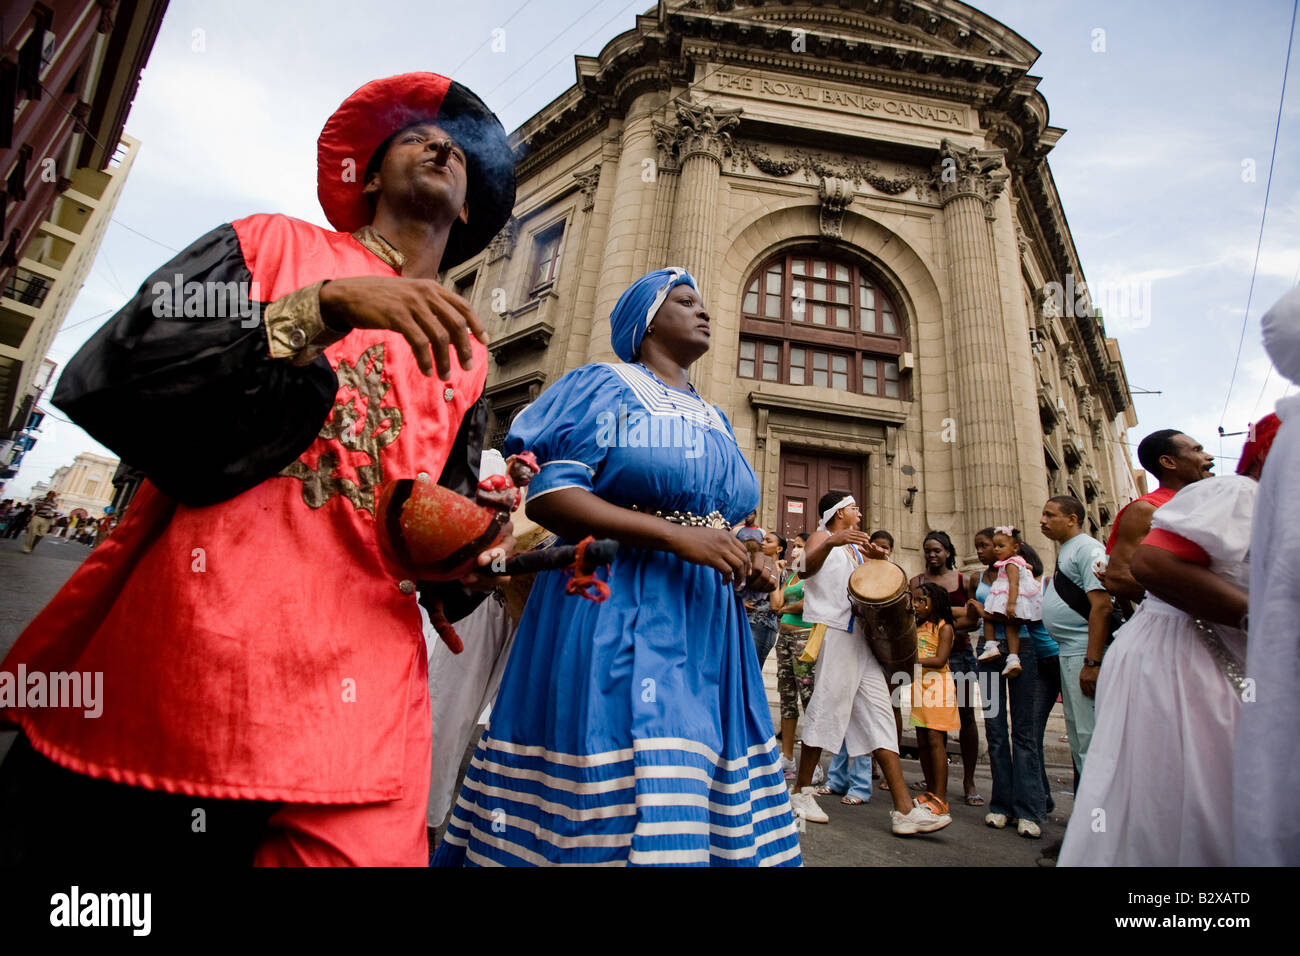 Dancers perform on the streets during the Fire festival in Santiago, Cuba Stock Photo